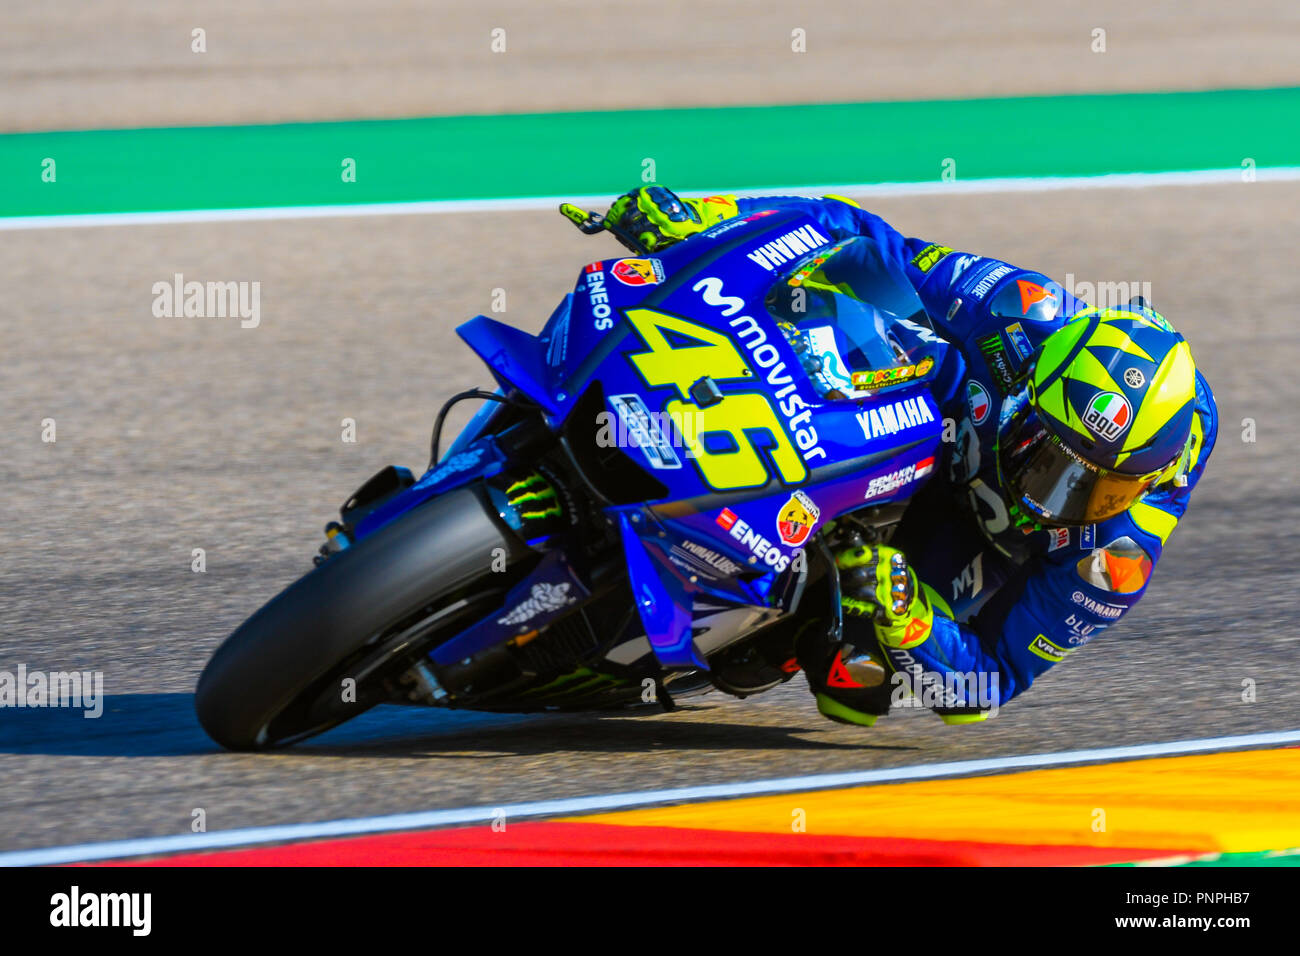 VALENTINO ROSSI (46) of Italy and Movistar Yamaha Moto GP during the MOTO GP  Free Practice